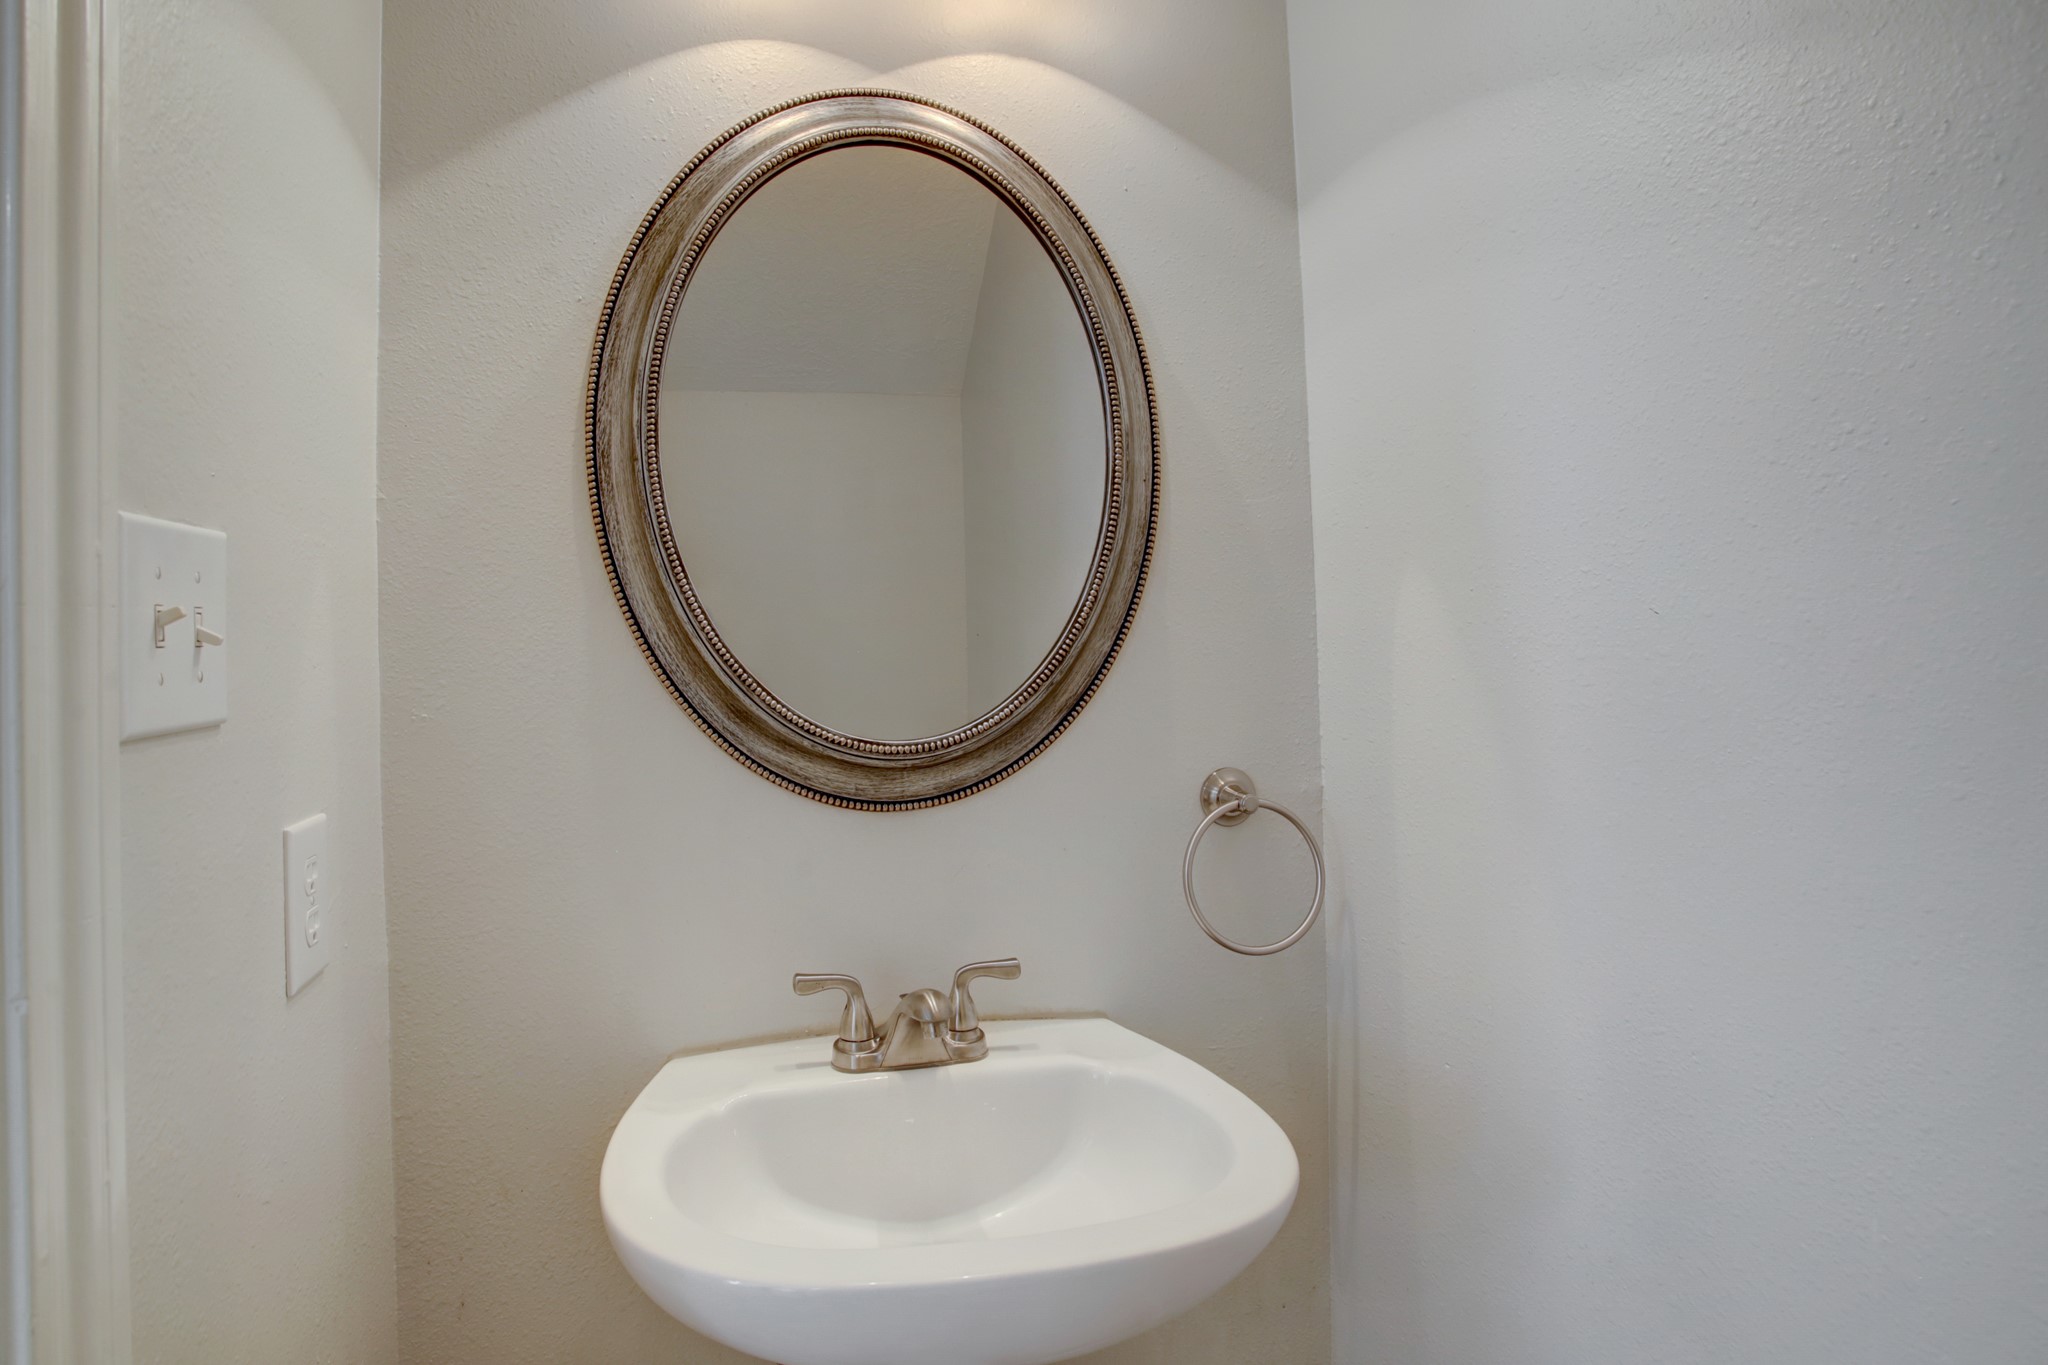 Nicely updated half bath with pedestal sink and framed mirror conveniently located.